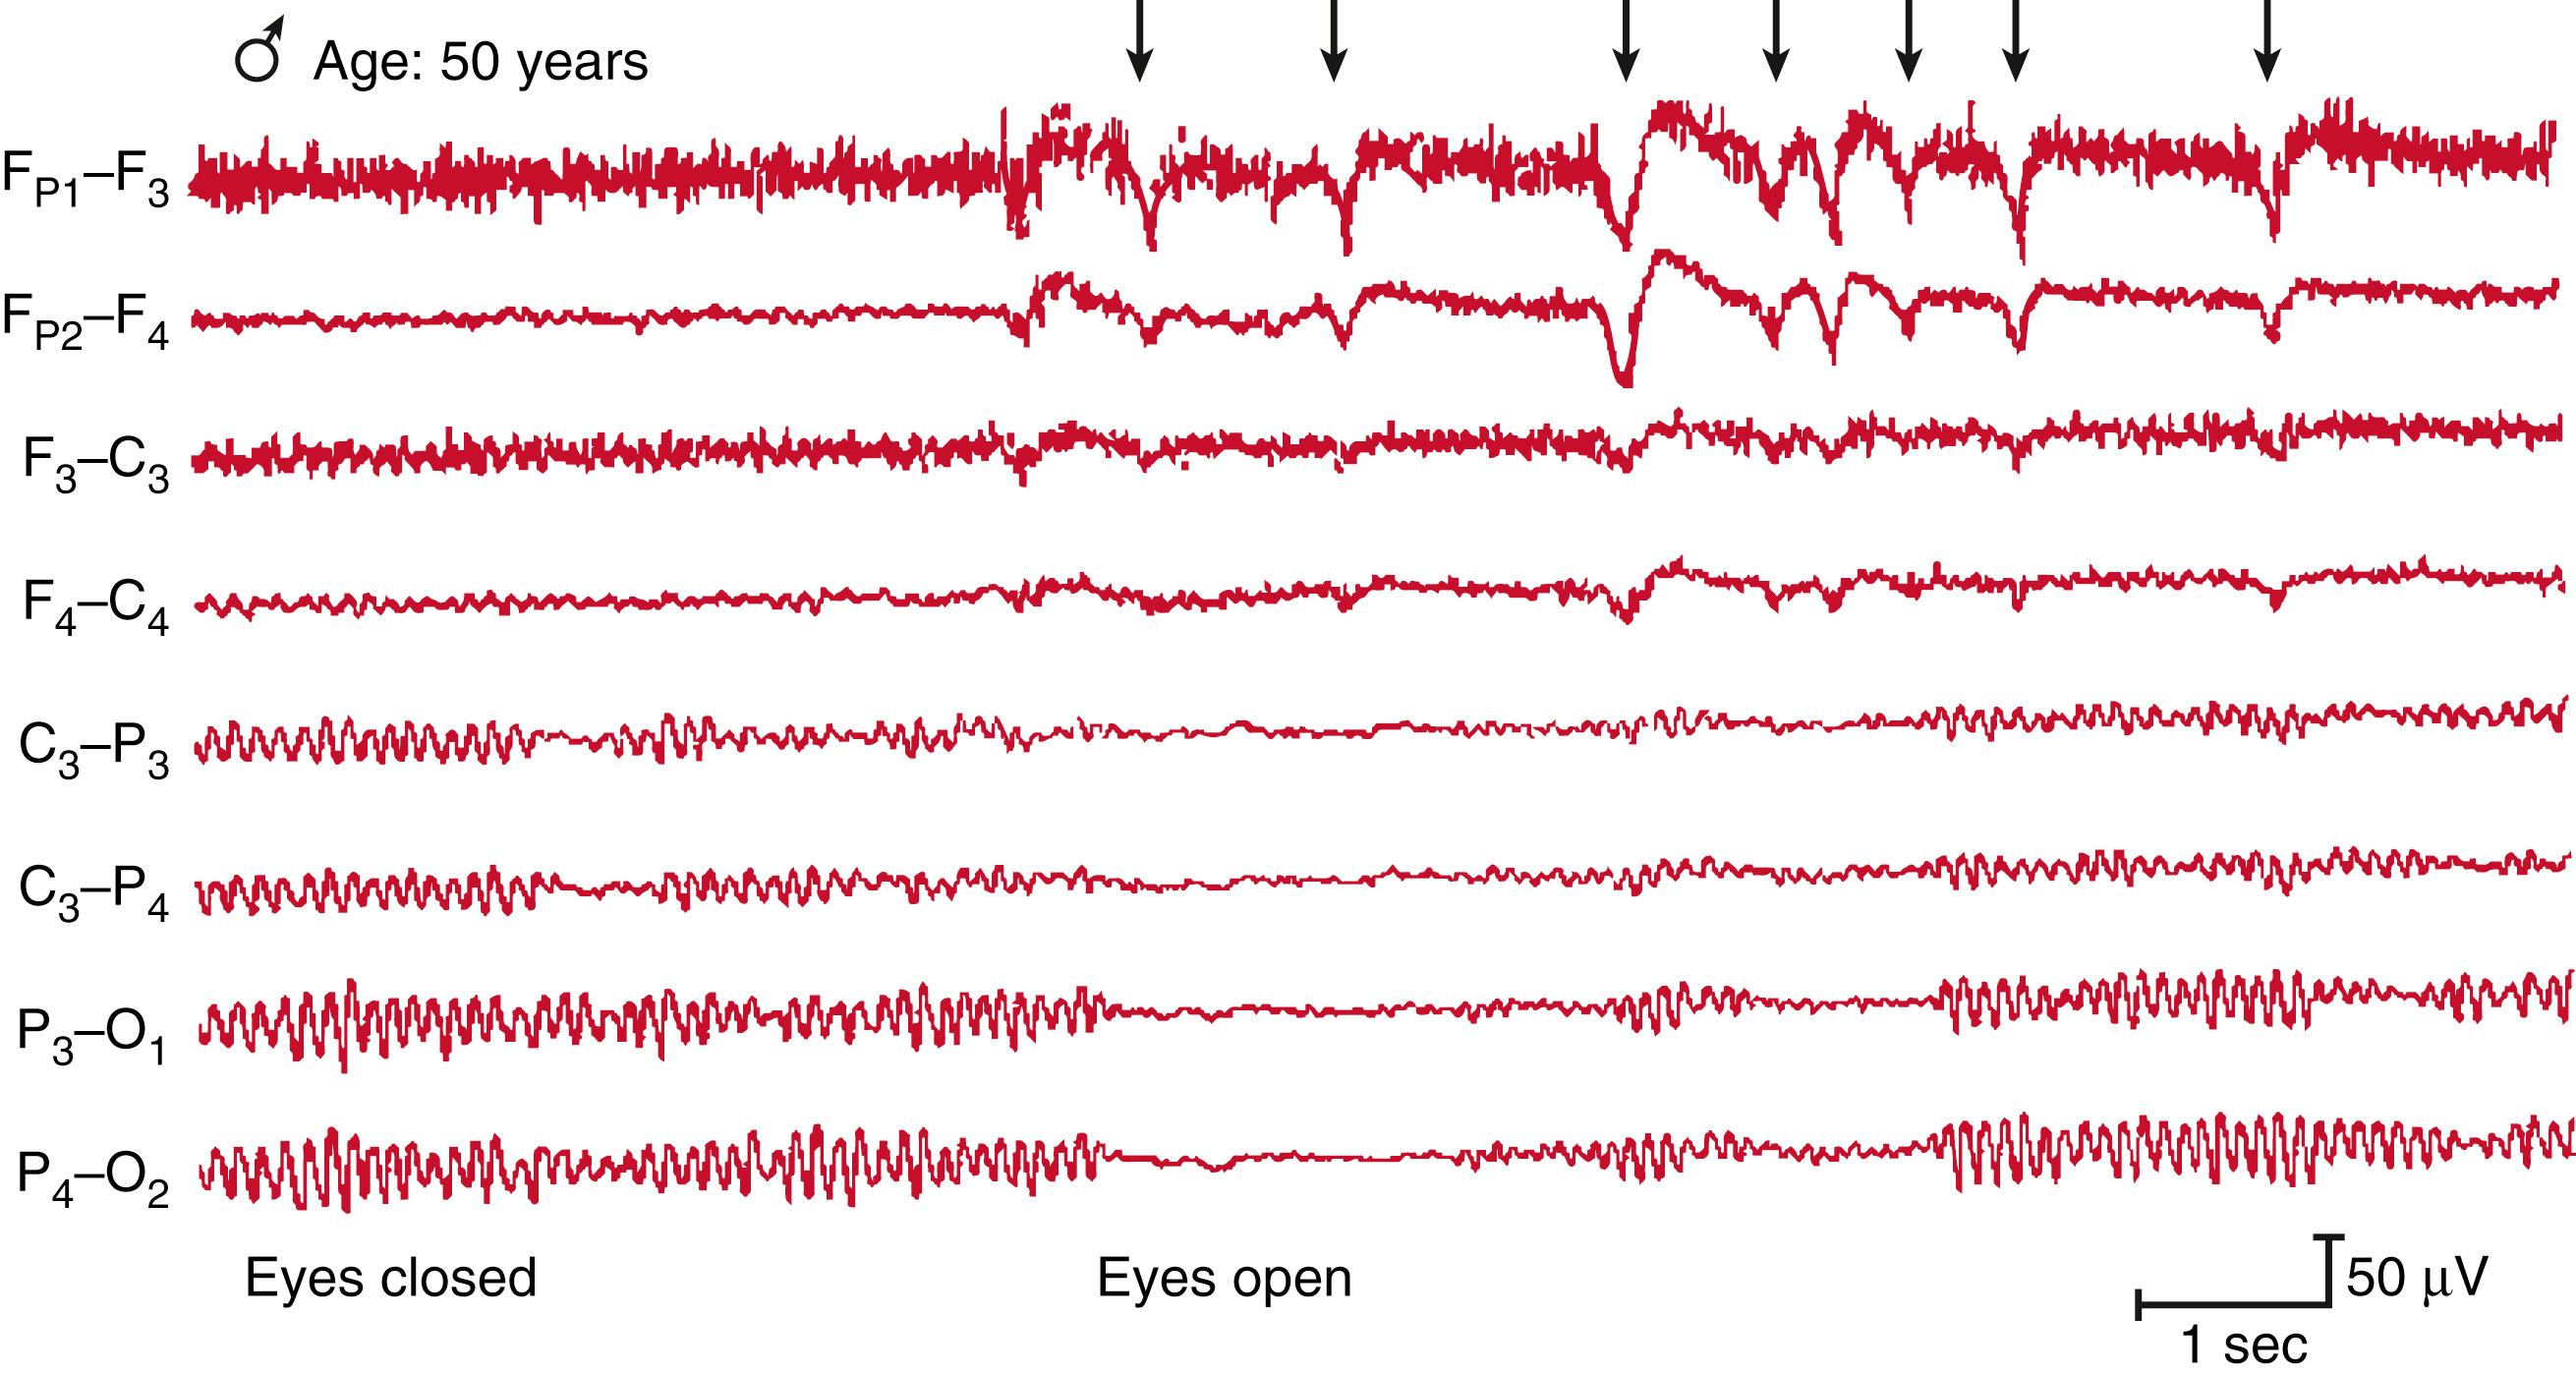 Fig. 39.4, The loss and return of alpha activity as the eyes open and close can be seen. The large spikes (↓) are muscle artifact from eye blinks and hence are best visible in channels that incorporate frontal electrodes (designated F).